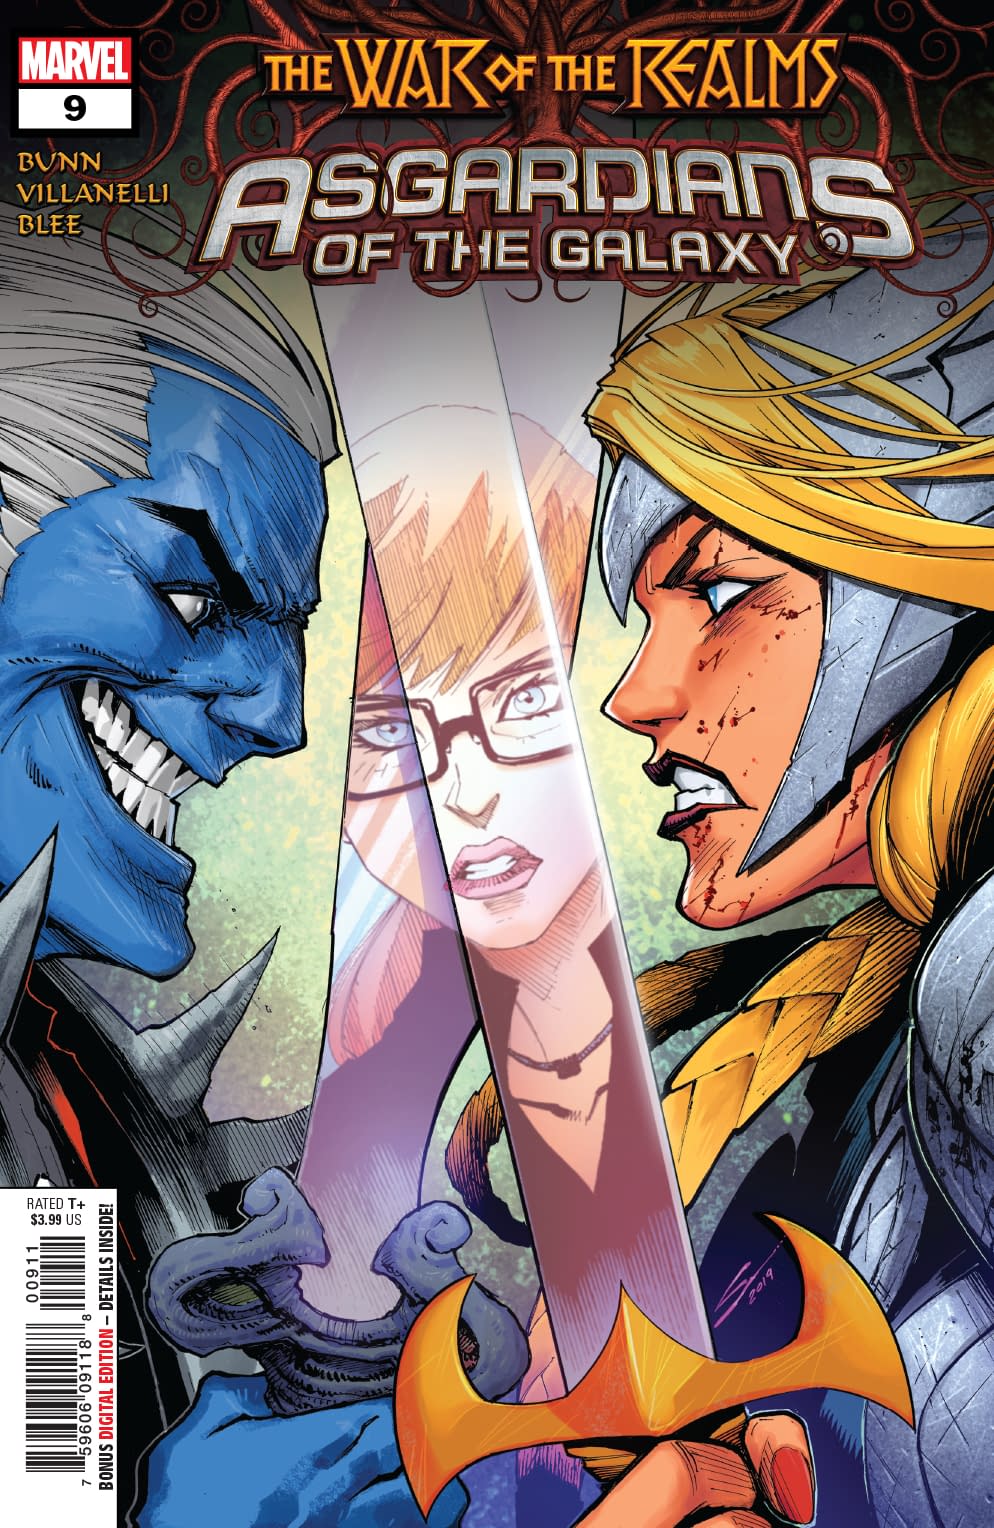 Annabelle Riggs is Only Mostly Dead in Asgardians of the Galaxy #9 (Preview)